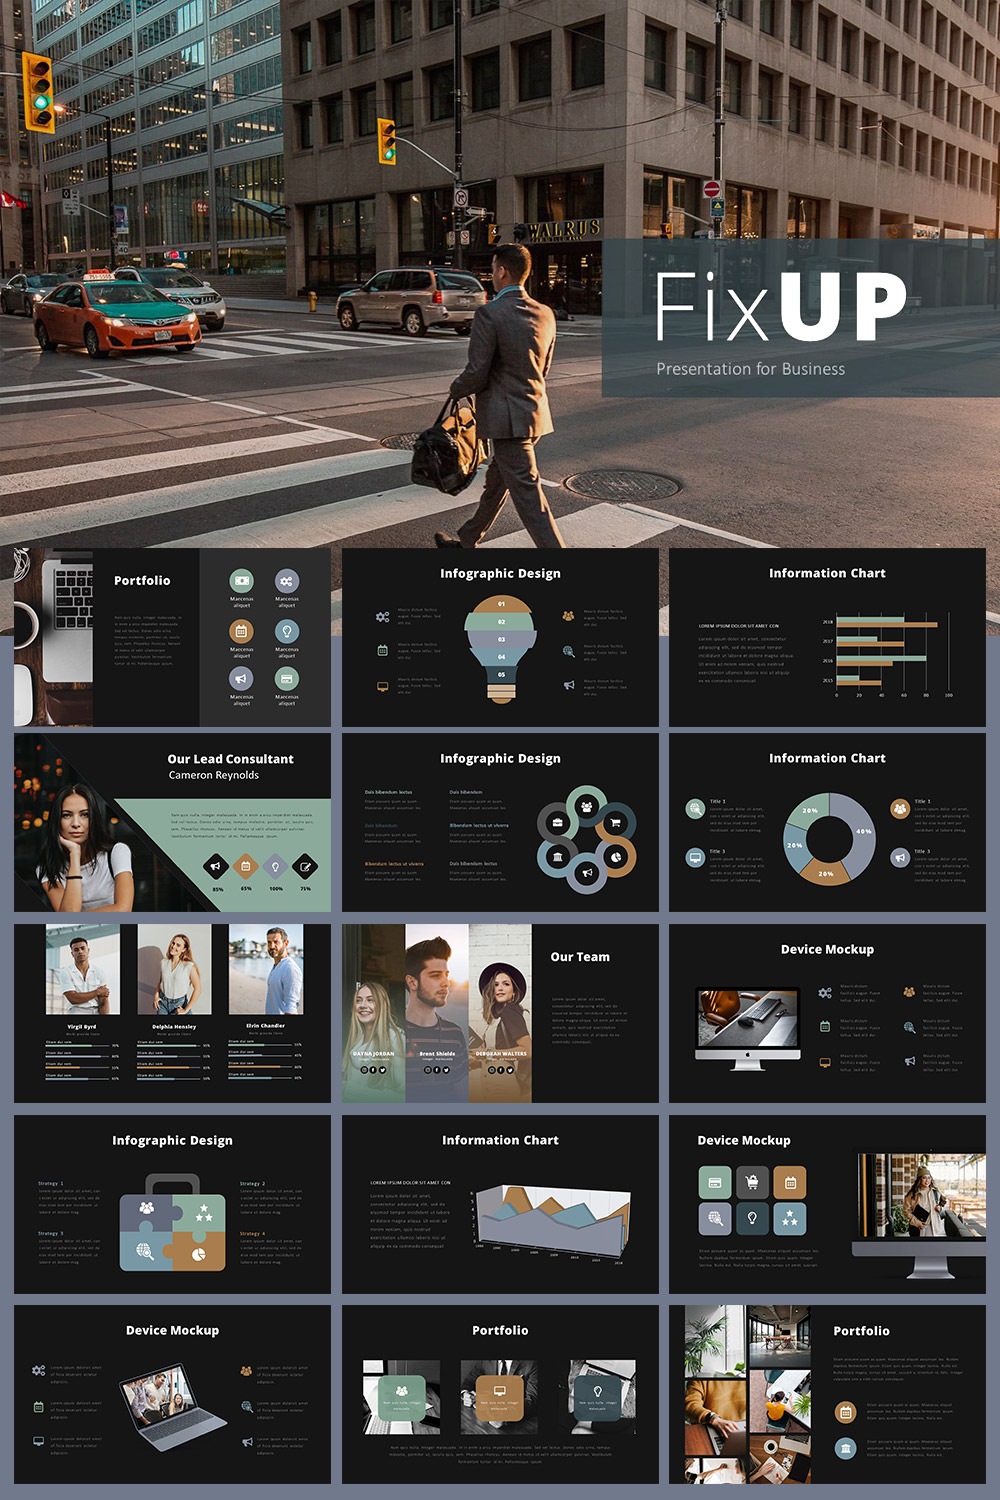 FixUp - Presentation for Business pinterest image.